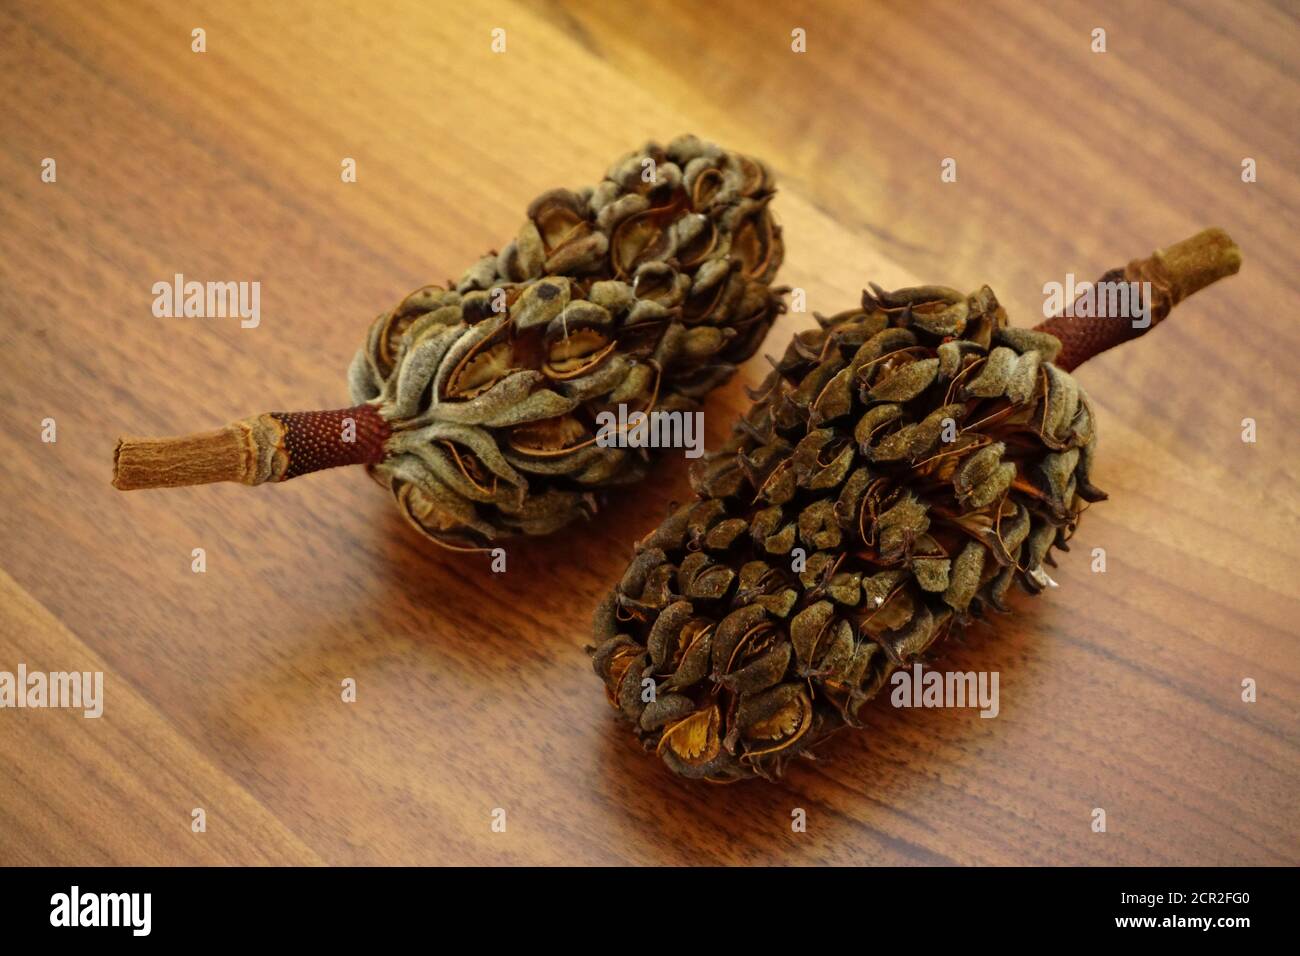 Dried magnoila cones on wooden background Stock Photo